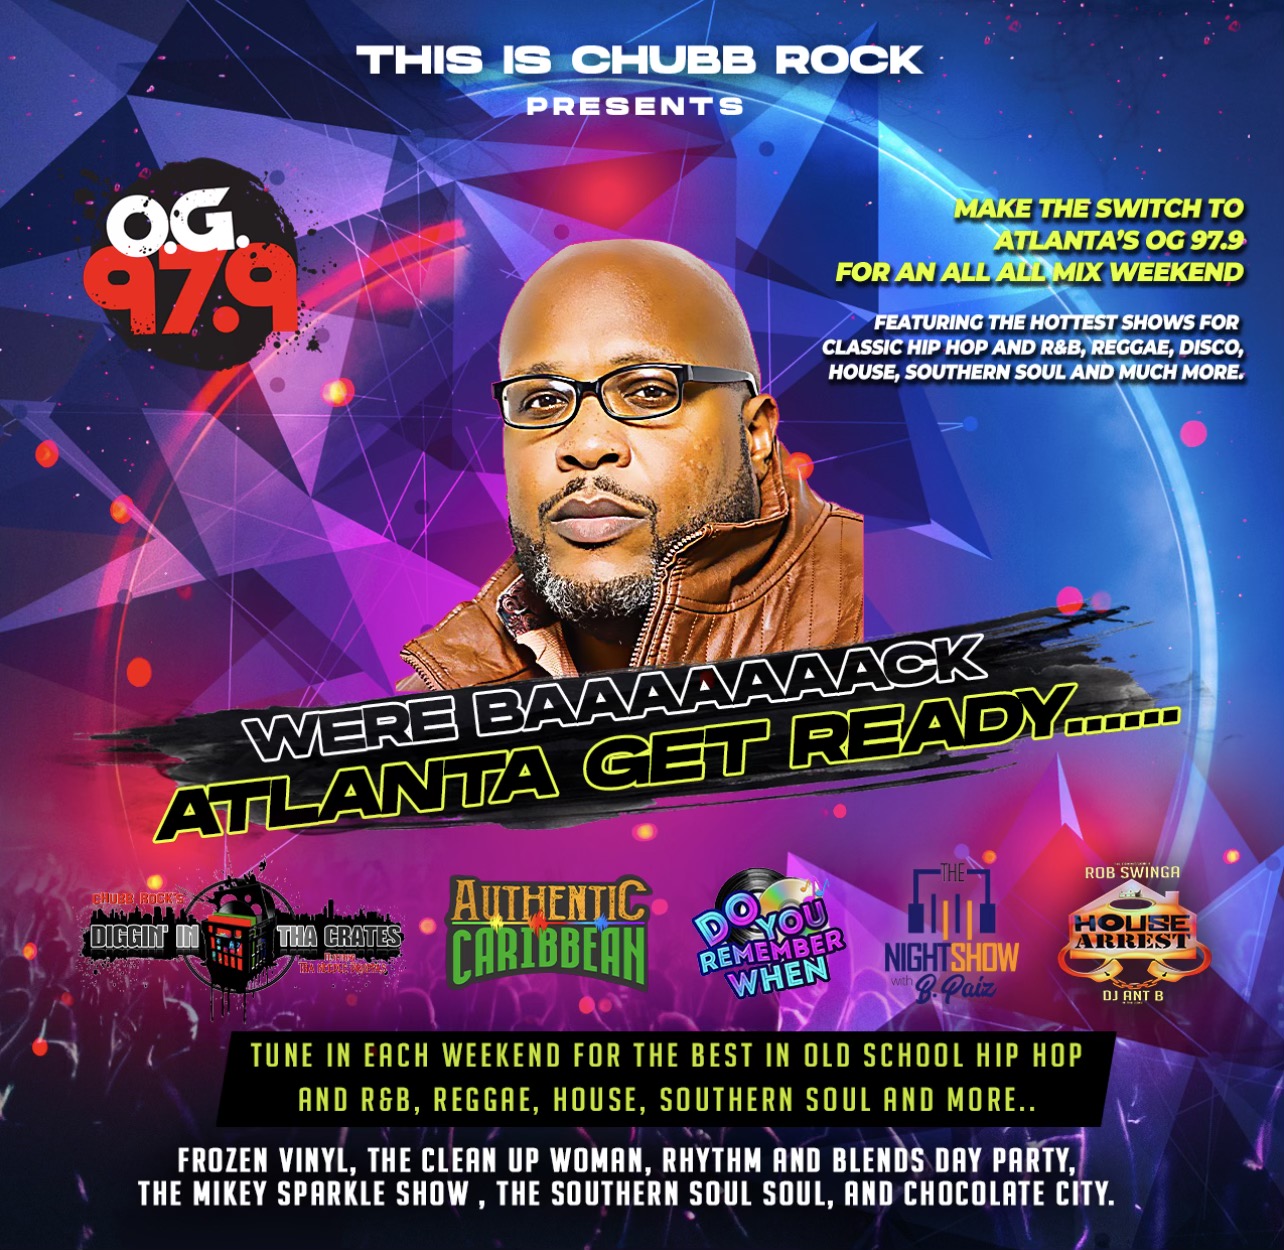 Chubb Rock joins OG 97.9, which adds new weekend remix shows